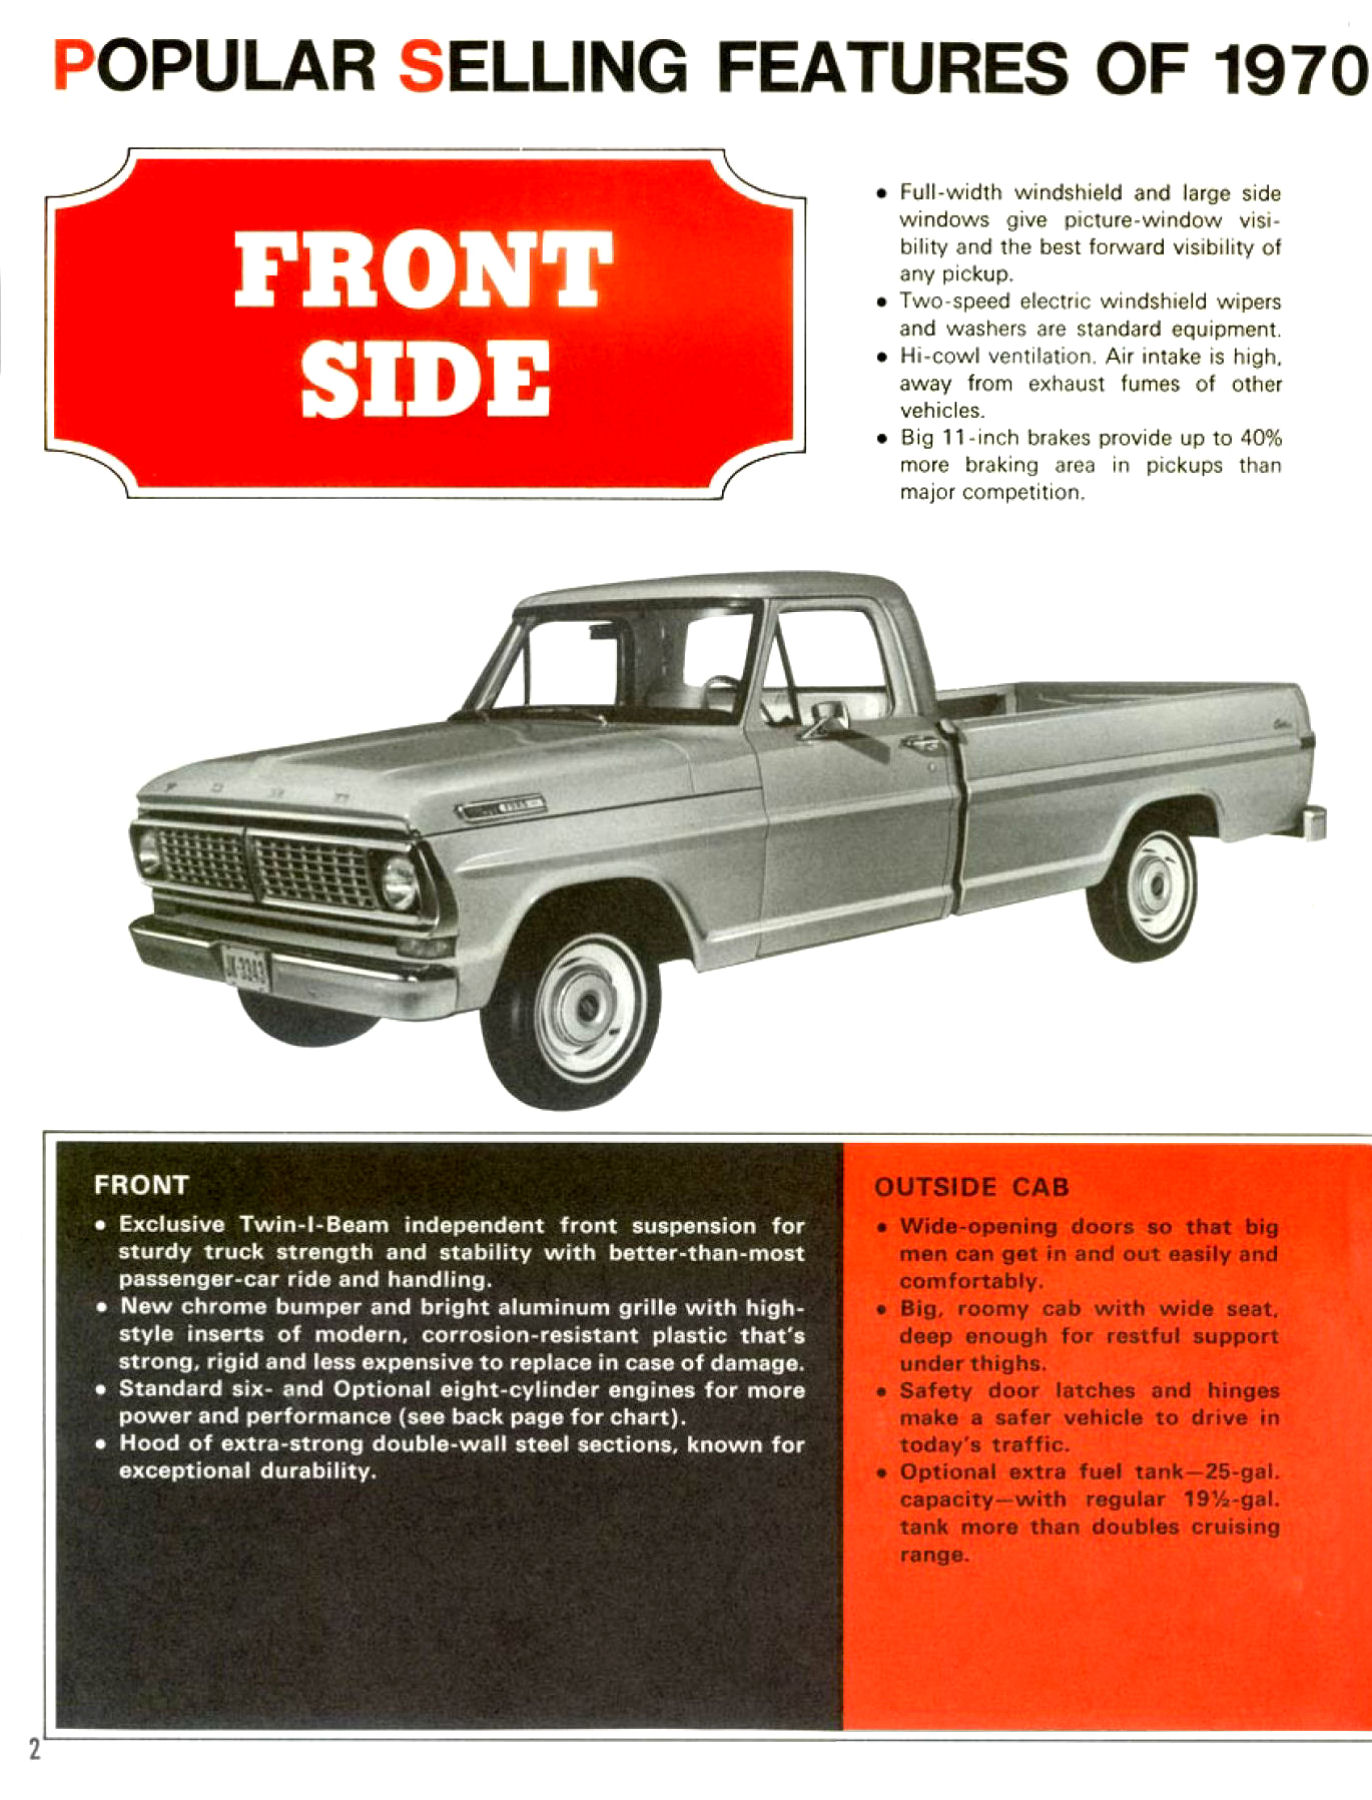 1970 Ford Light Truck Sales Features-02